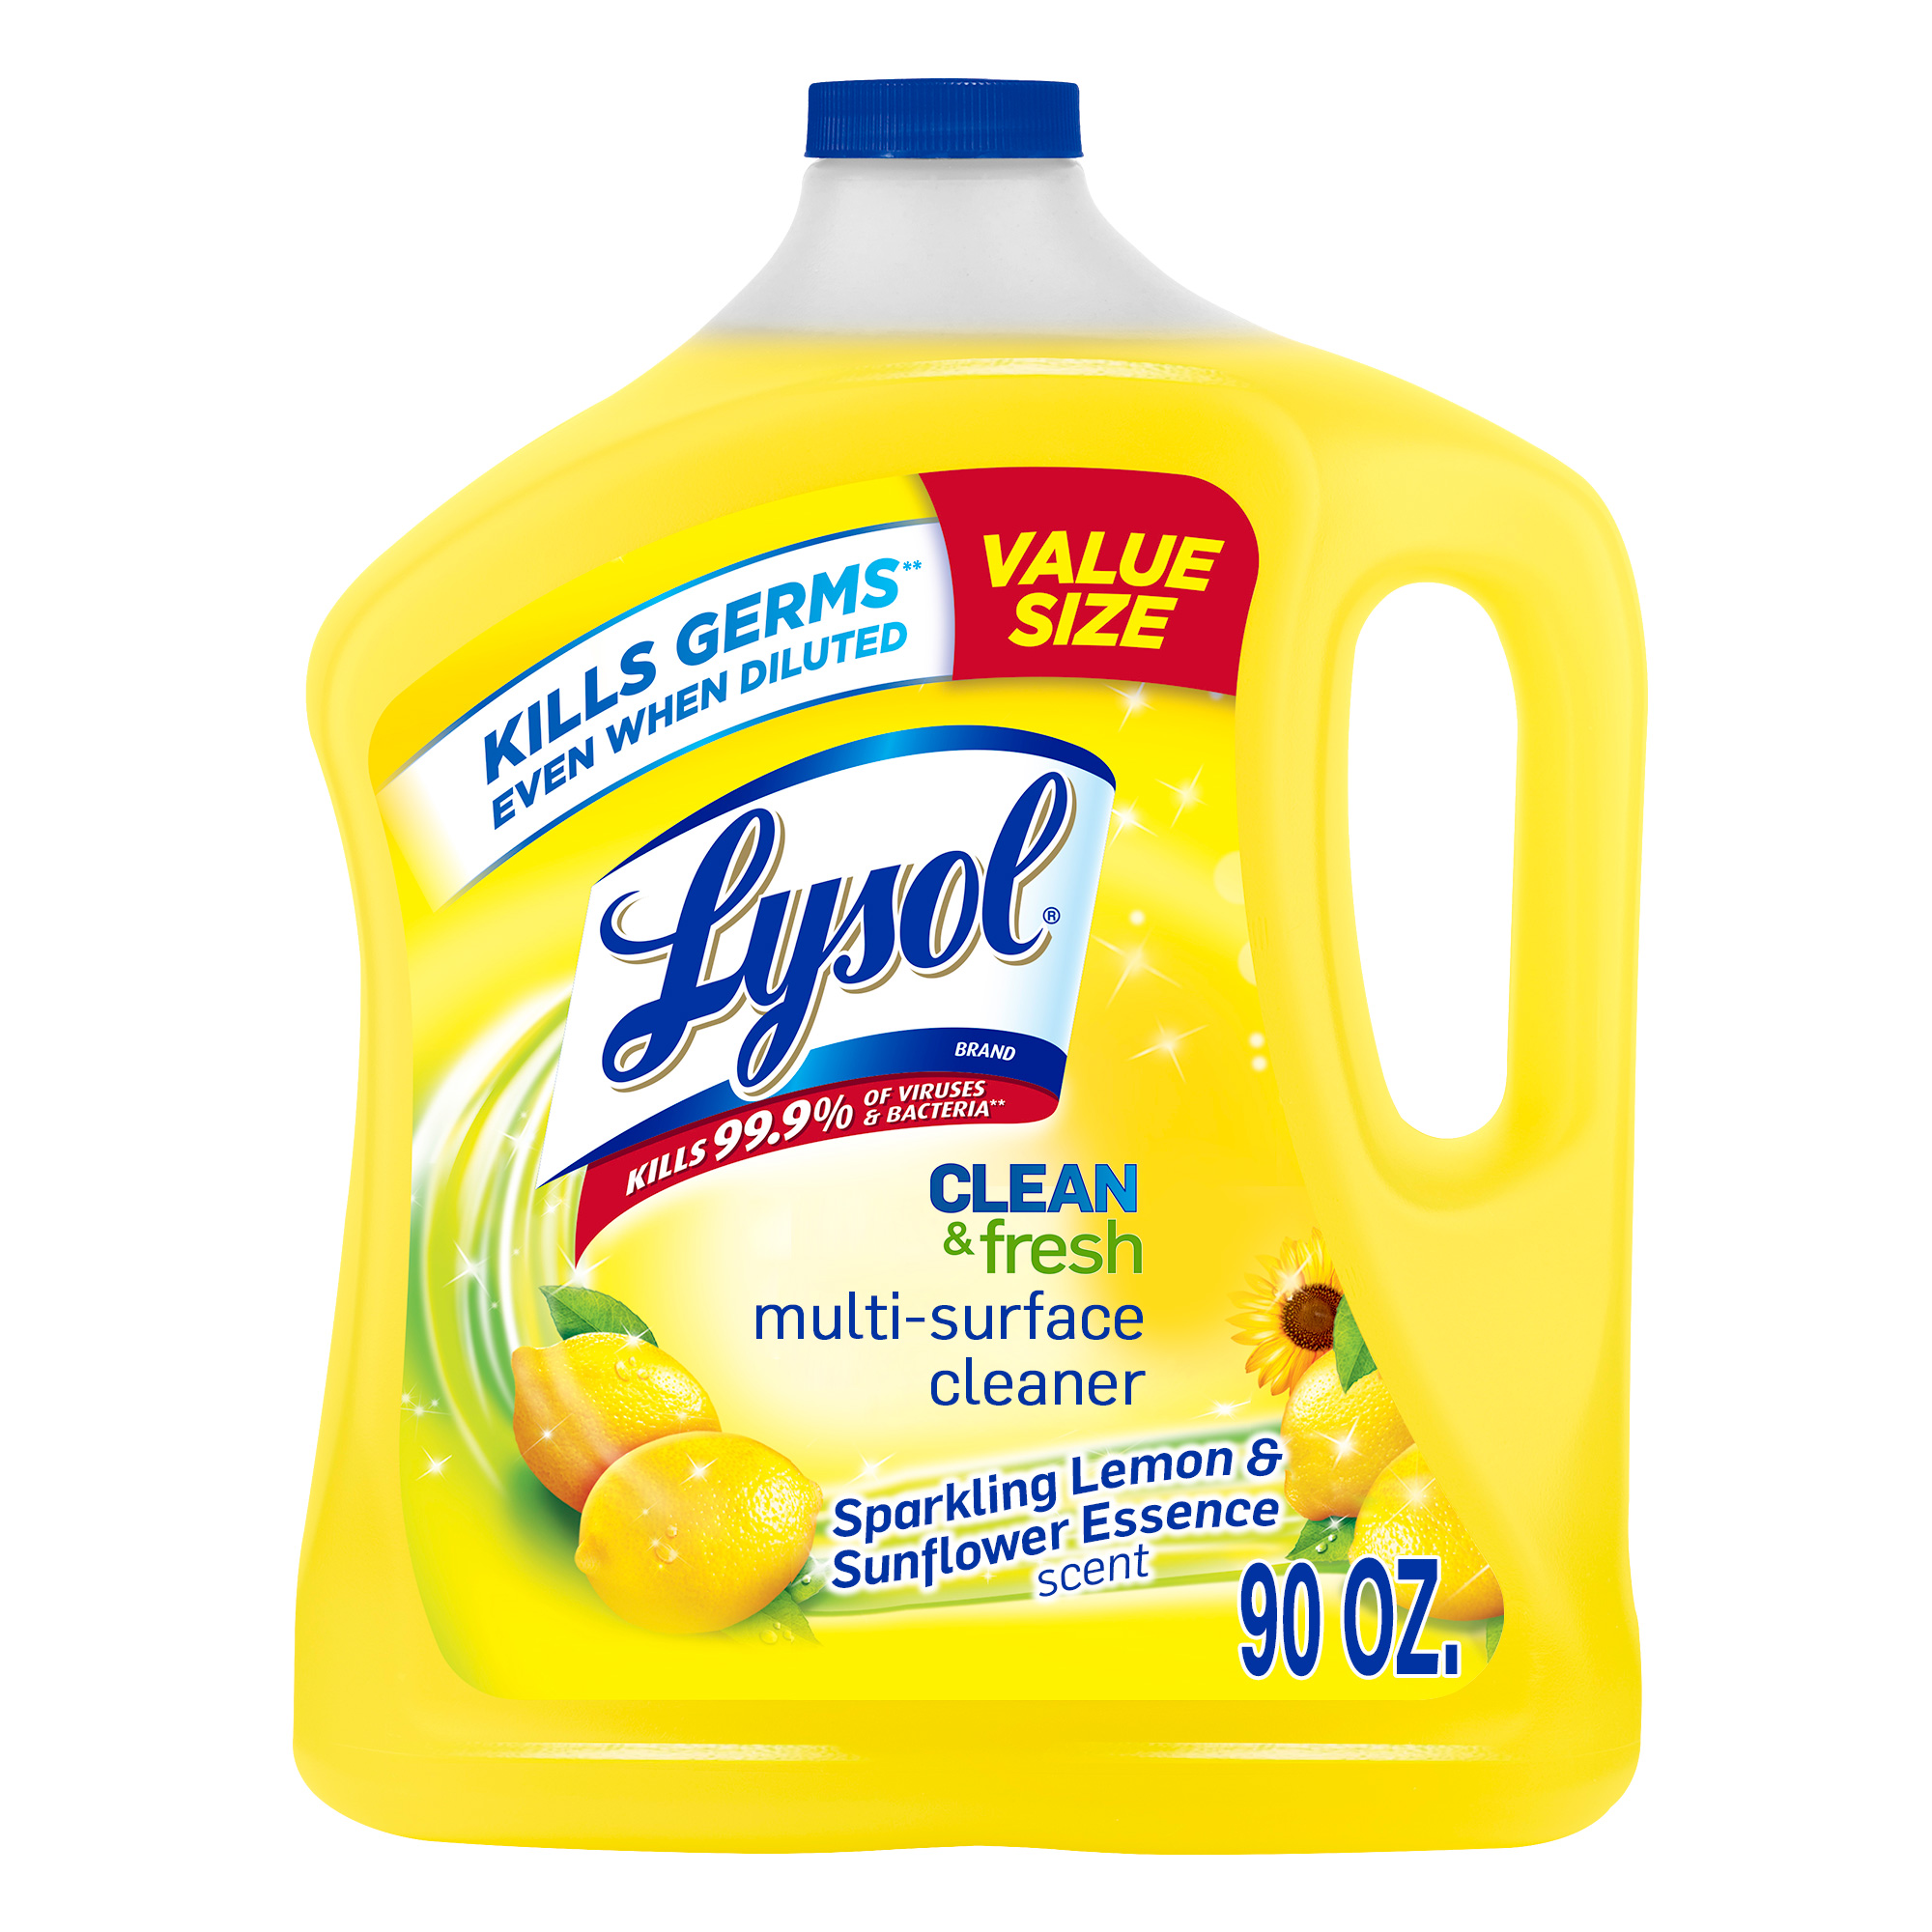 Lysol Multi-Surface Cleaner, Sanitizing and Disinfecting Pour, to Clean and Deodorize, Sparkling Lemon and Sunflower Essence, 90 Fl Oz. - image 1 of 6